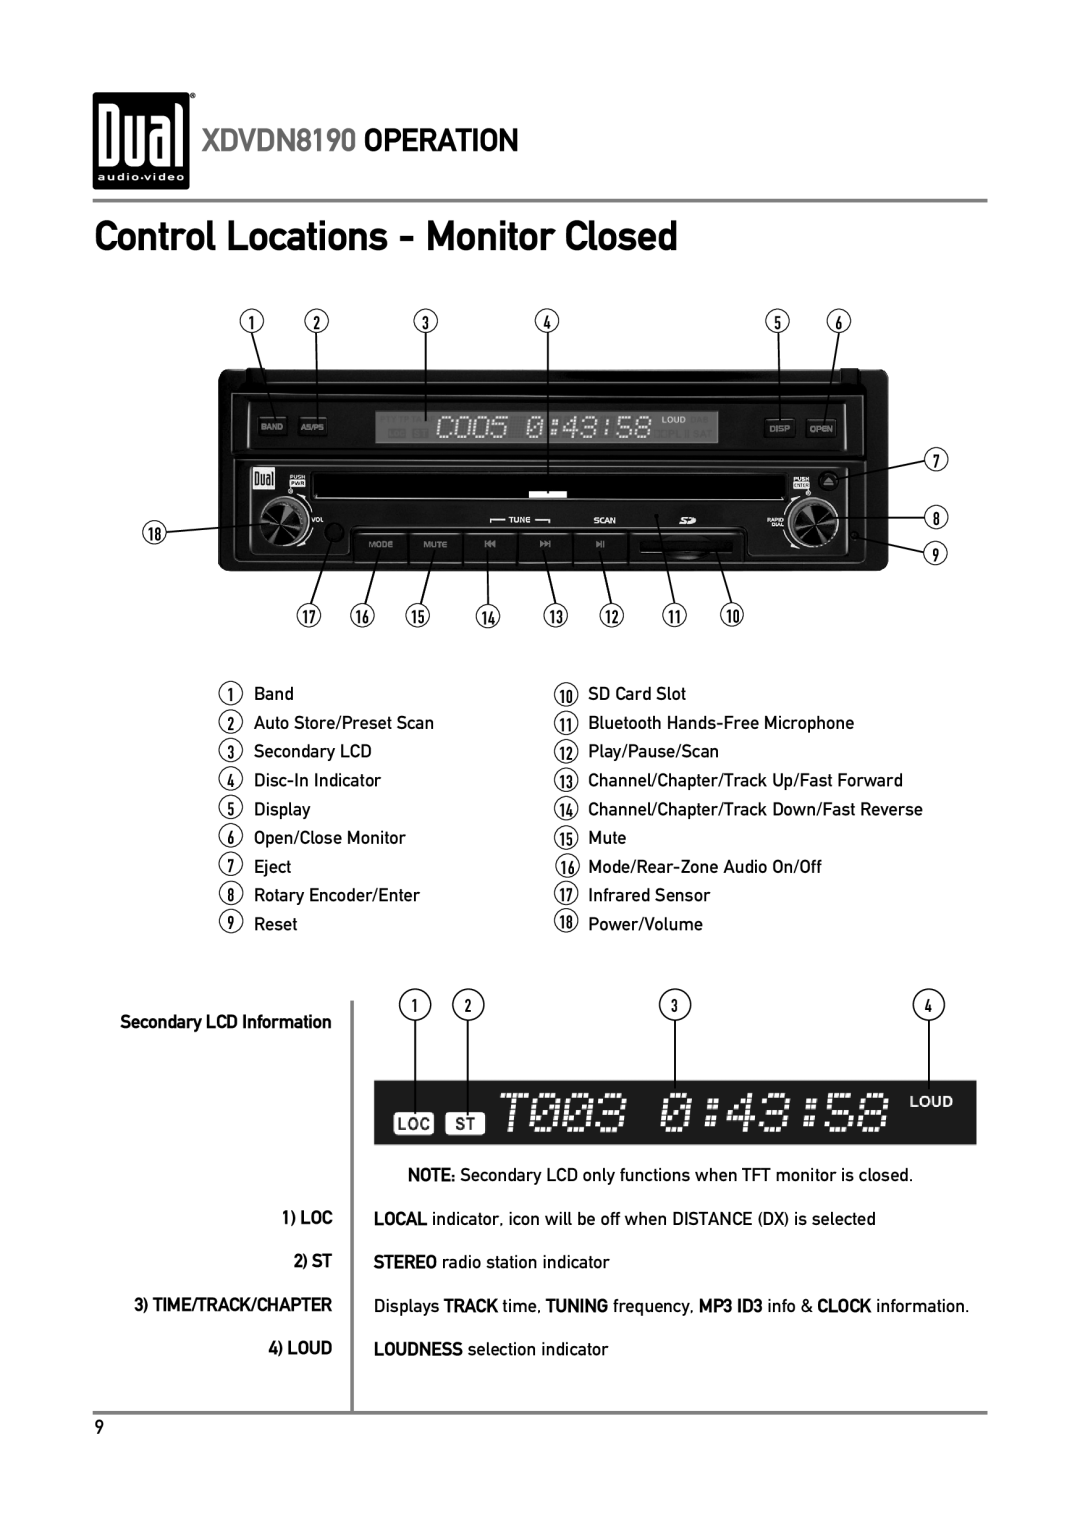 Dual owner manual Control Locations - Monitor Closed, XDVDN8190 OPERATION, LOC 2 ST 3TIME/TRACK/ LOUD 